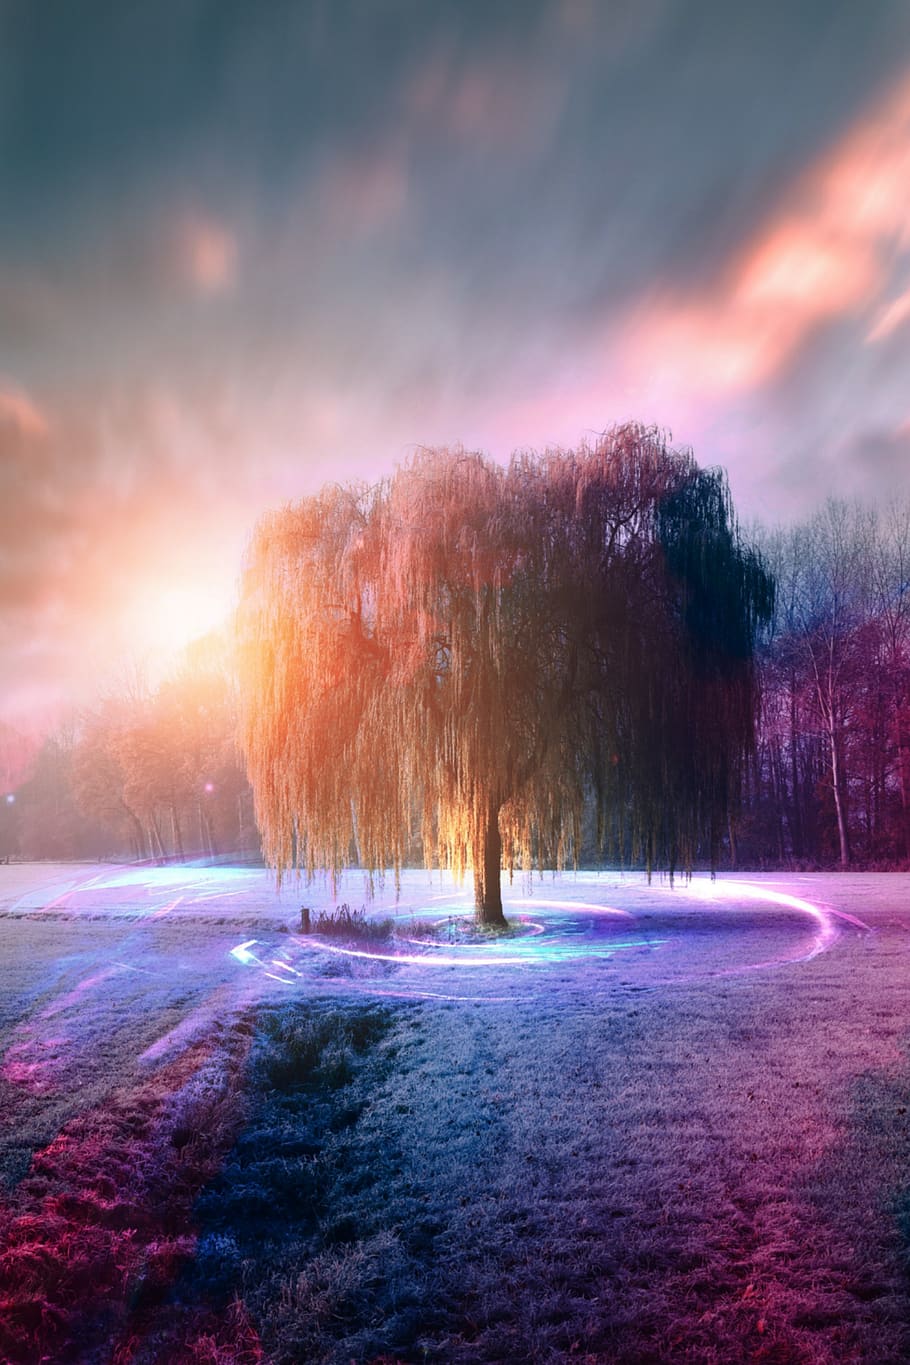 willow, tree, winter, light, color, sky, clouds, snow, background, shop